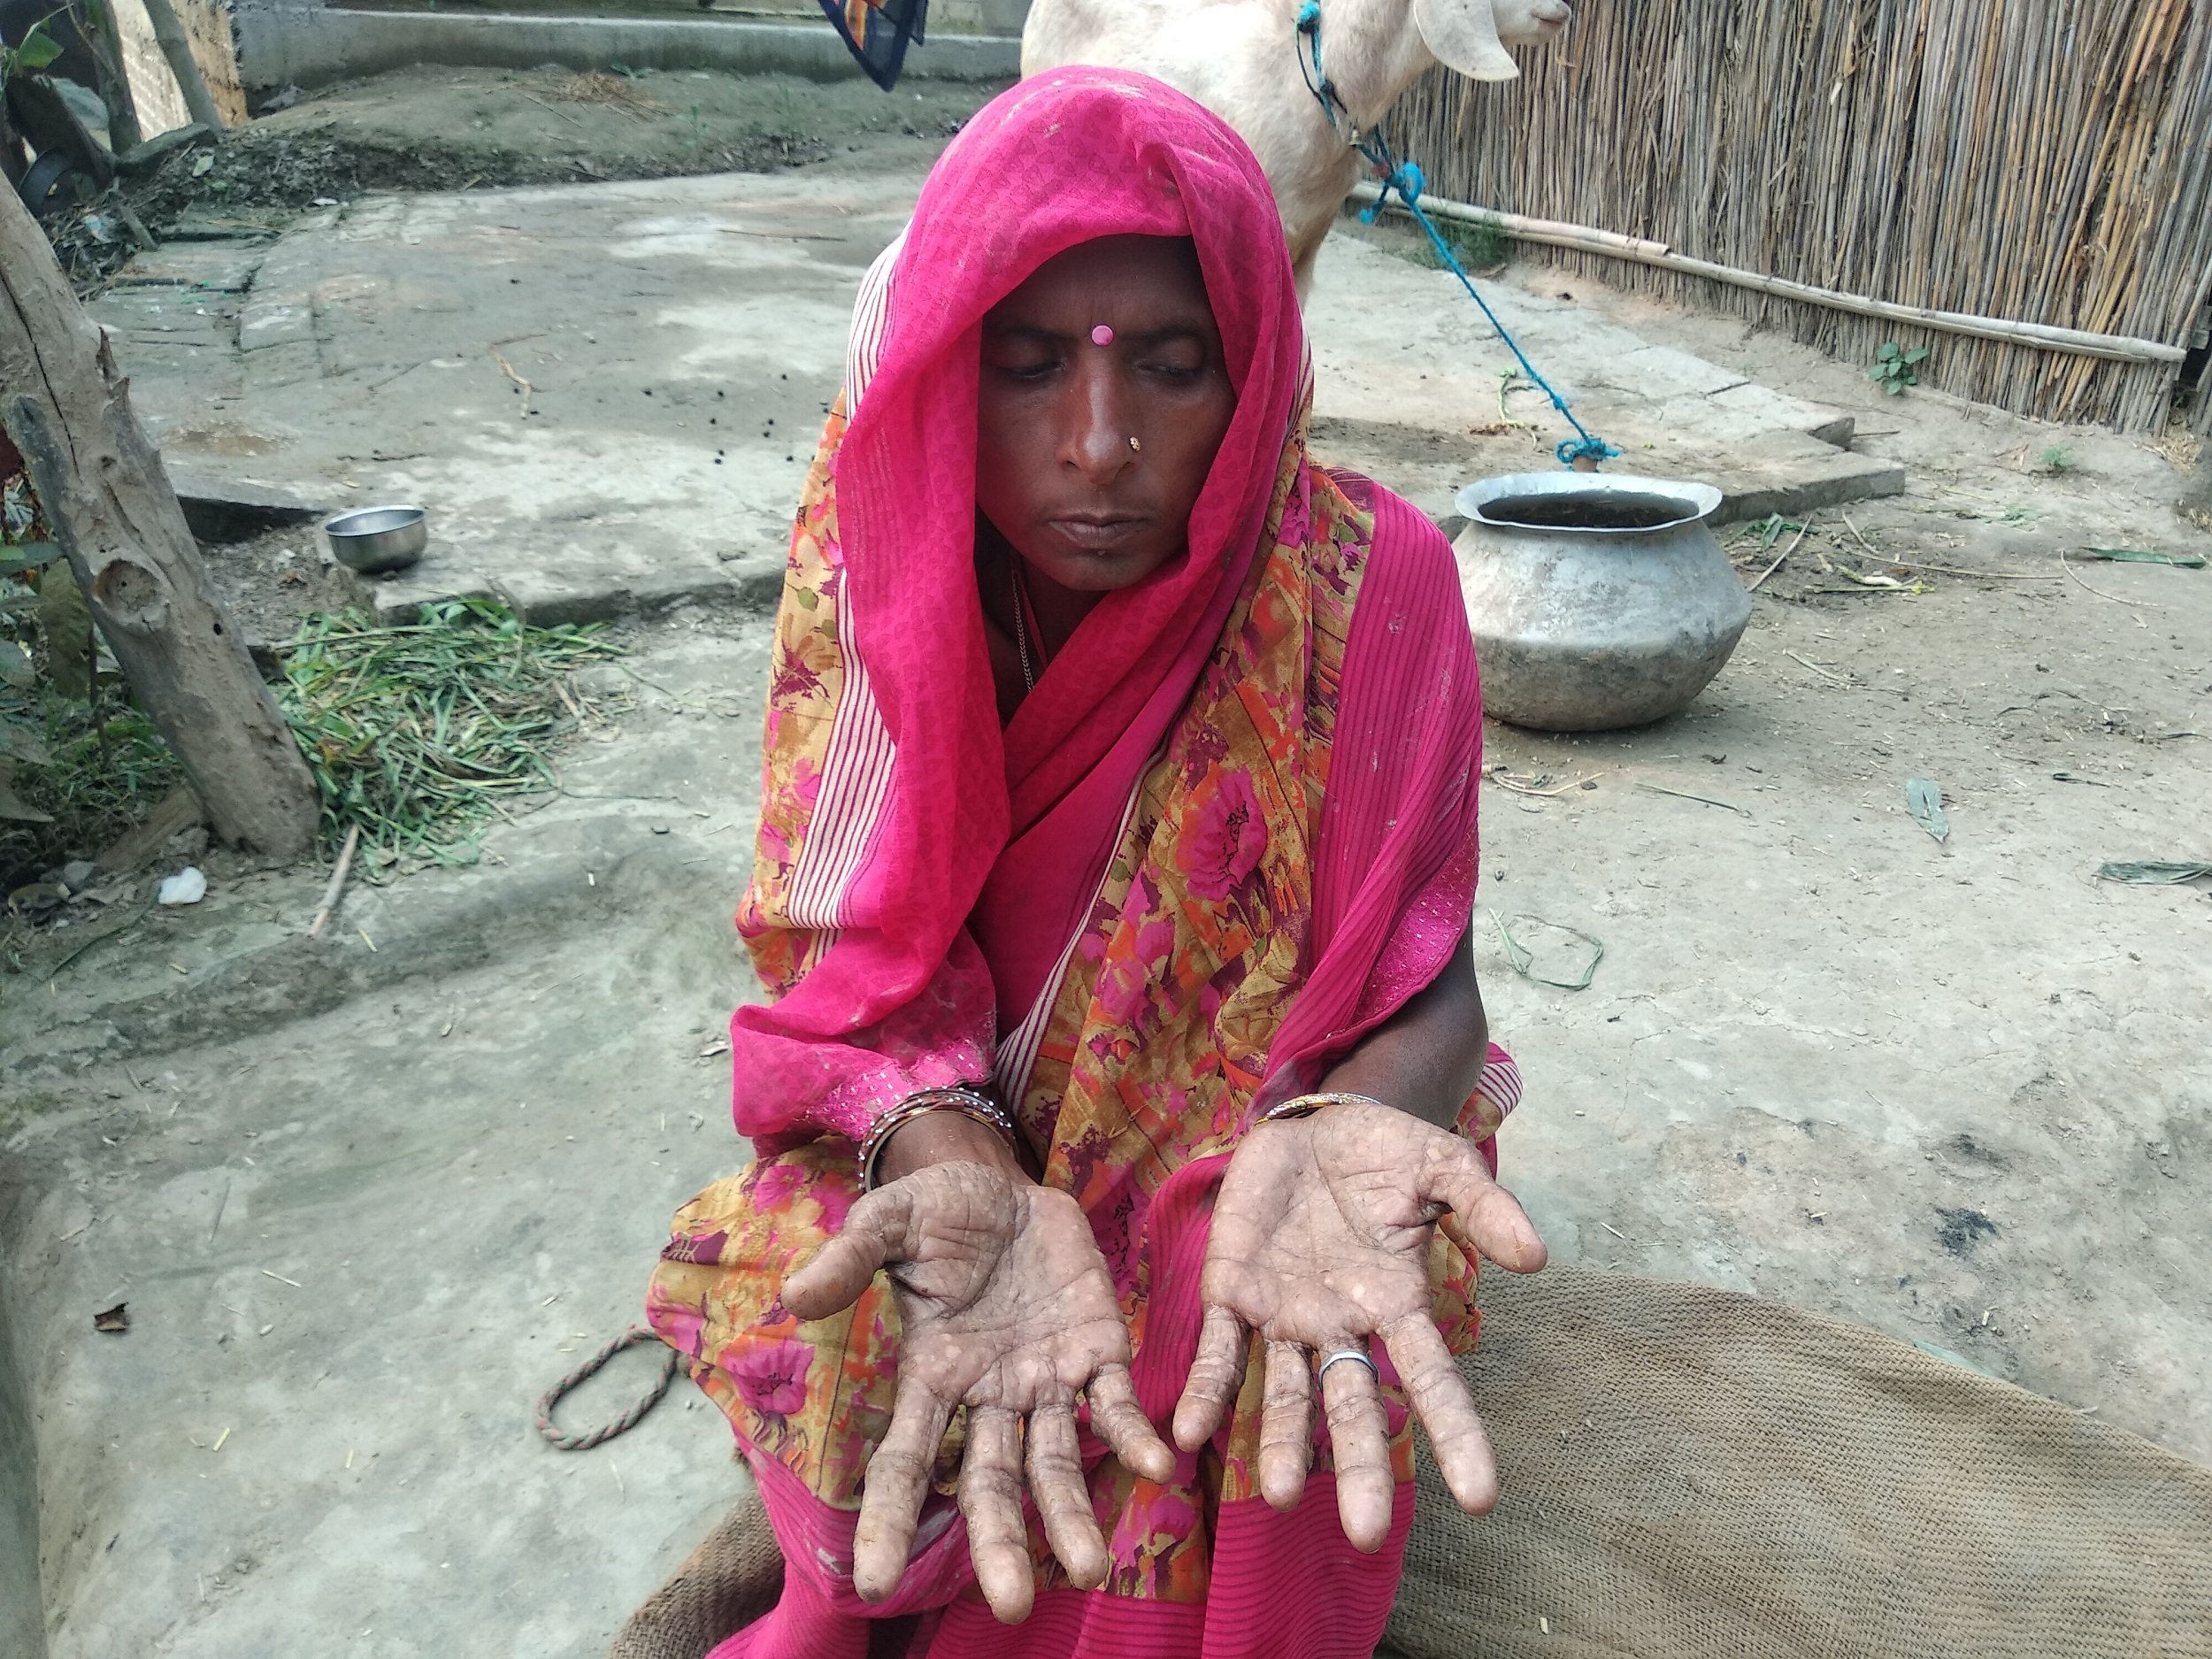 Indu Devi, 35, of Chapar village of Moinuddinagar block in Samastipur district of Bihar. She is suffering from lesions on her hands and feet but she never bothered to find out how they appeared. She said these don't itch, so she didn't think they need to be treated [image by: Umesh Kumar Ray]